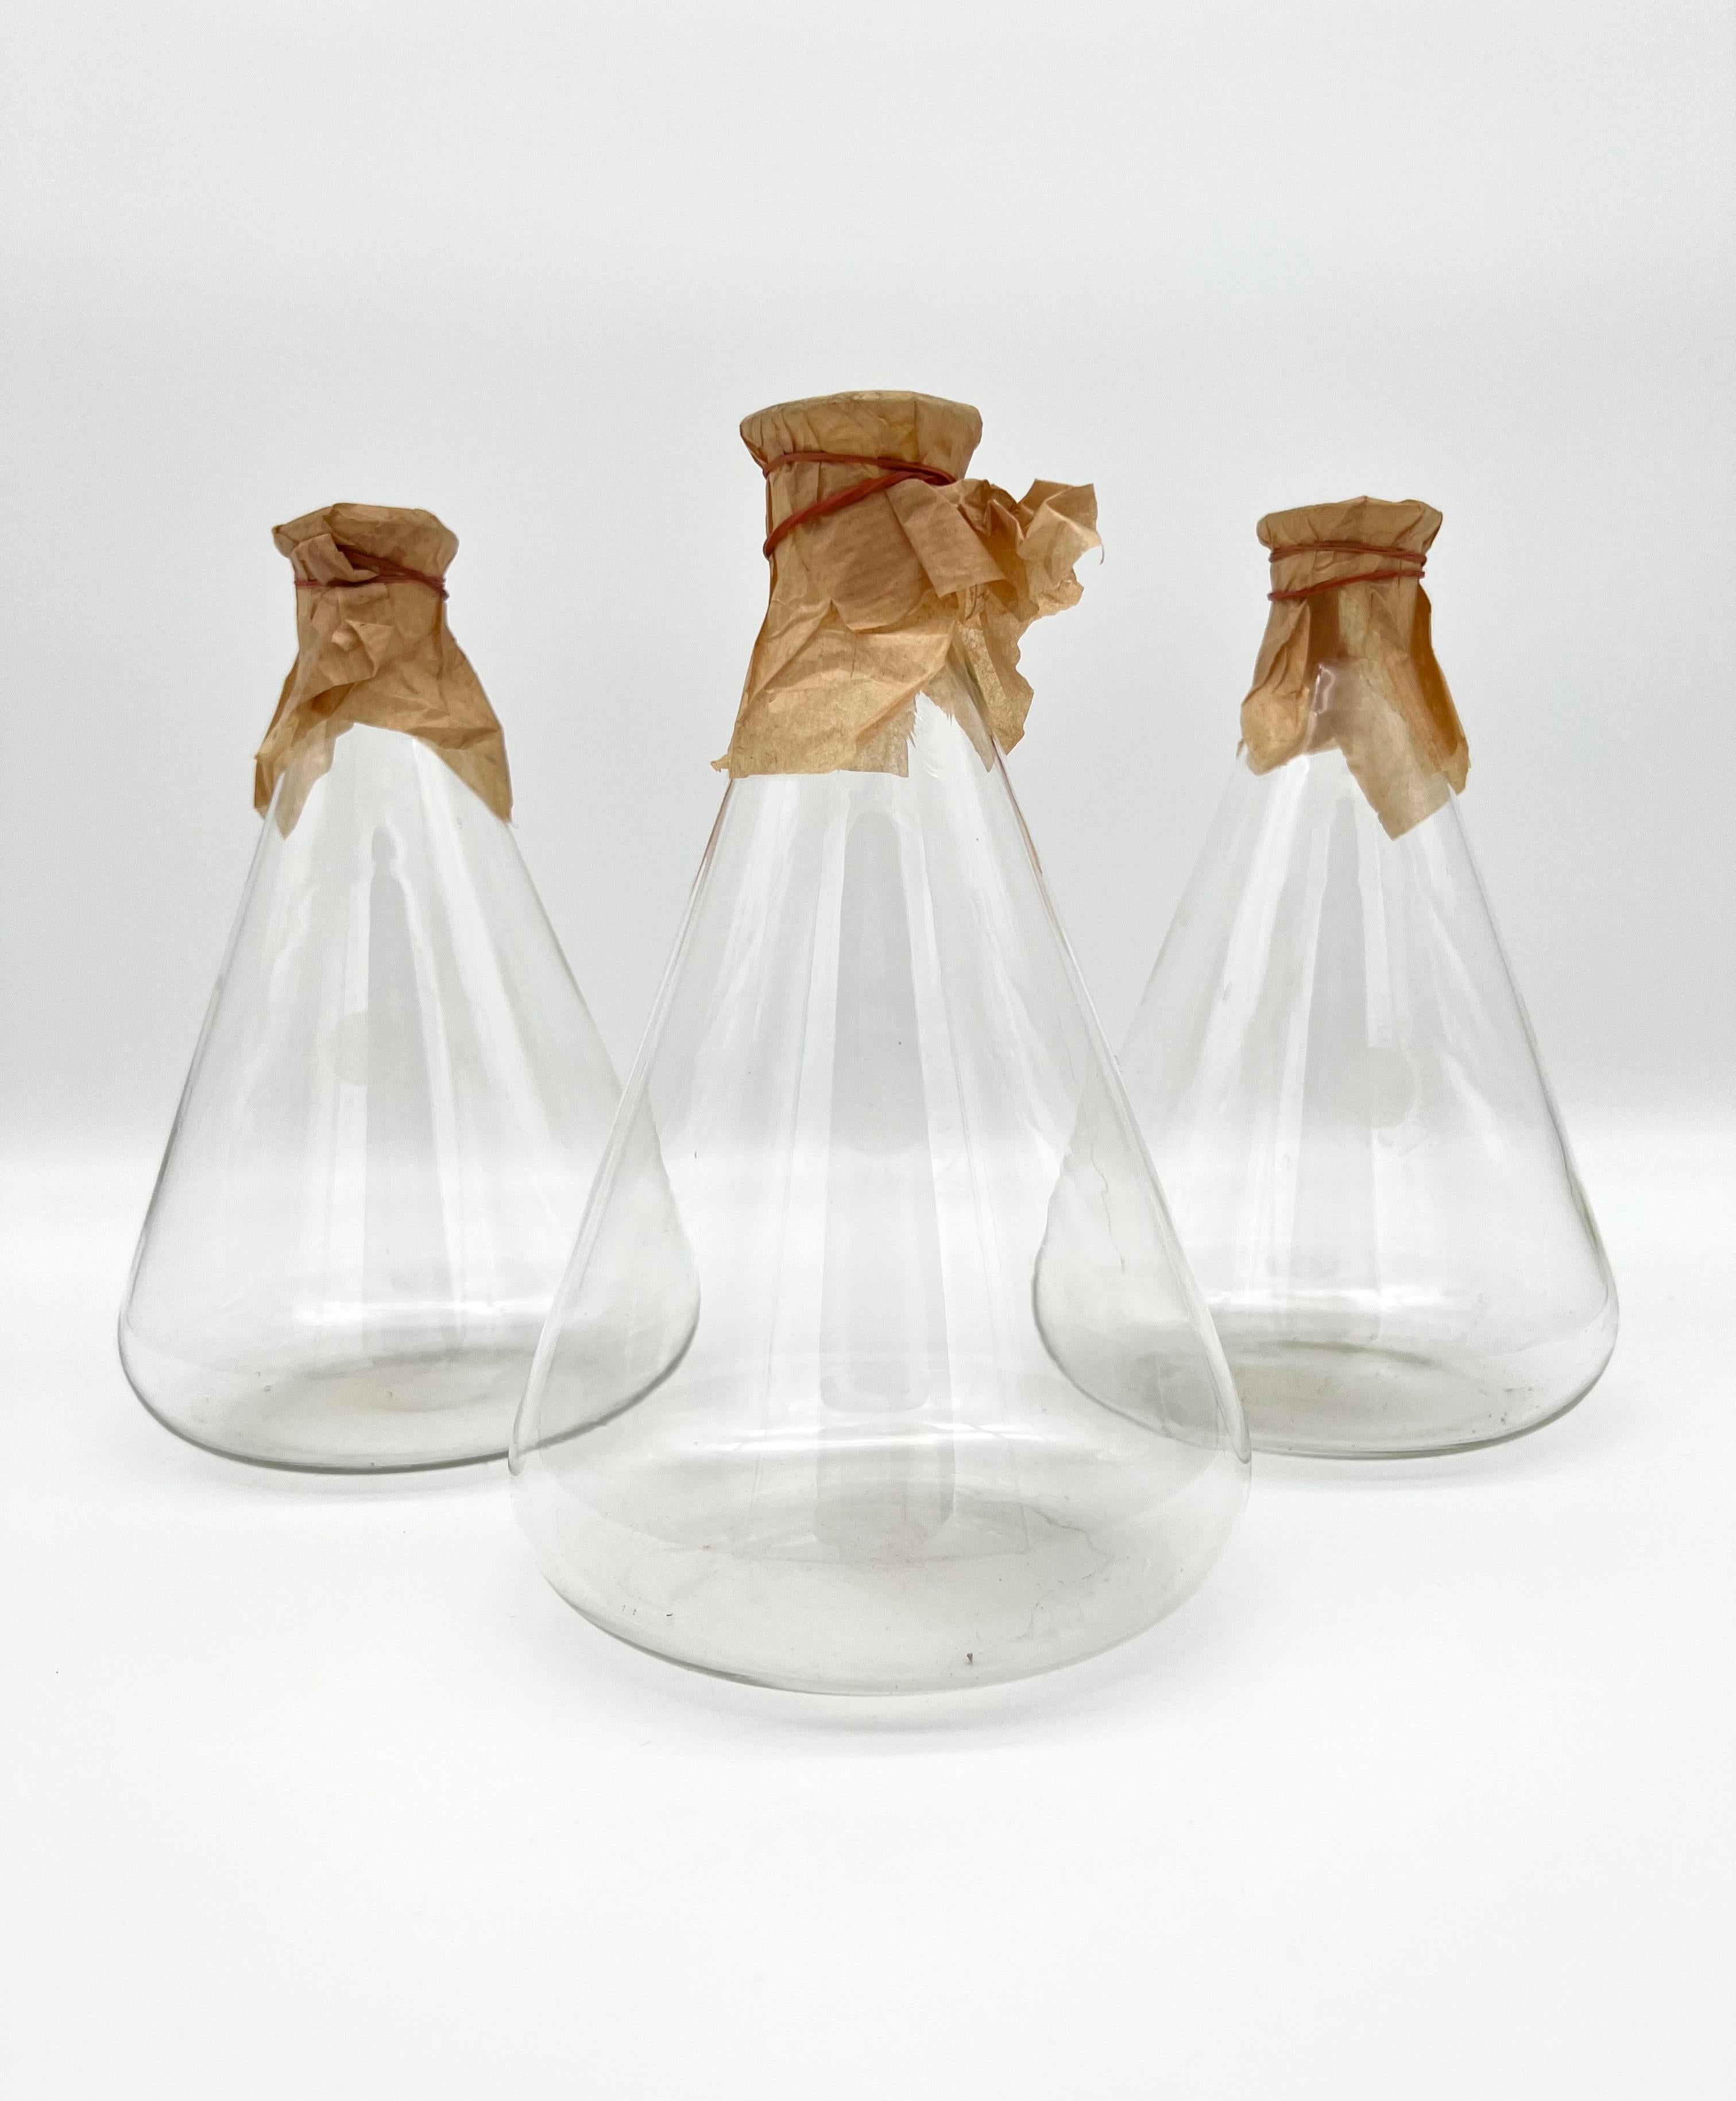 Set of Six Old Pharmacy Glass Bottles, Germany around 1900 For Sale 5